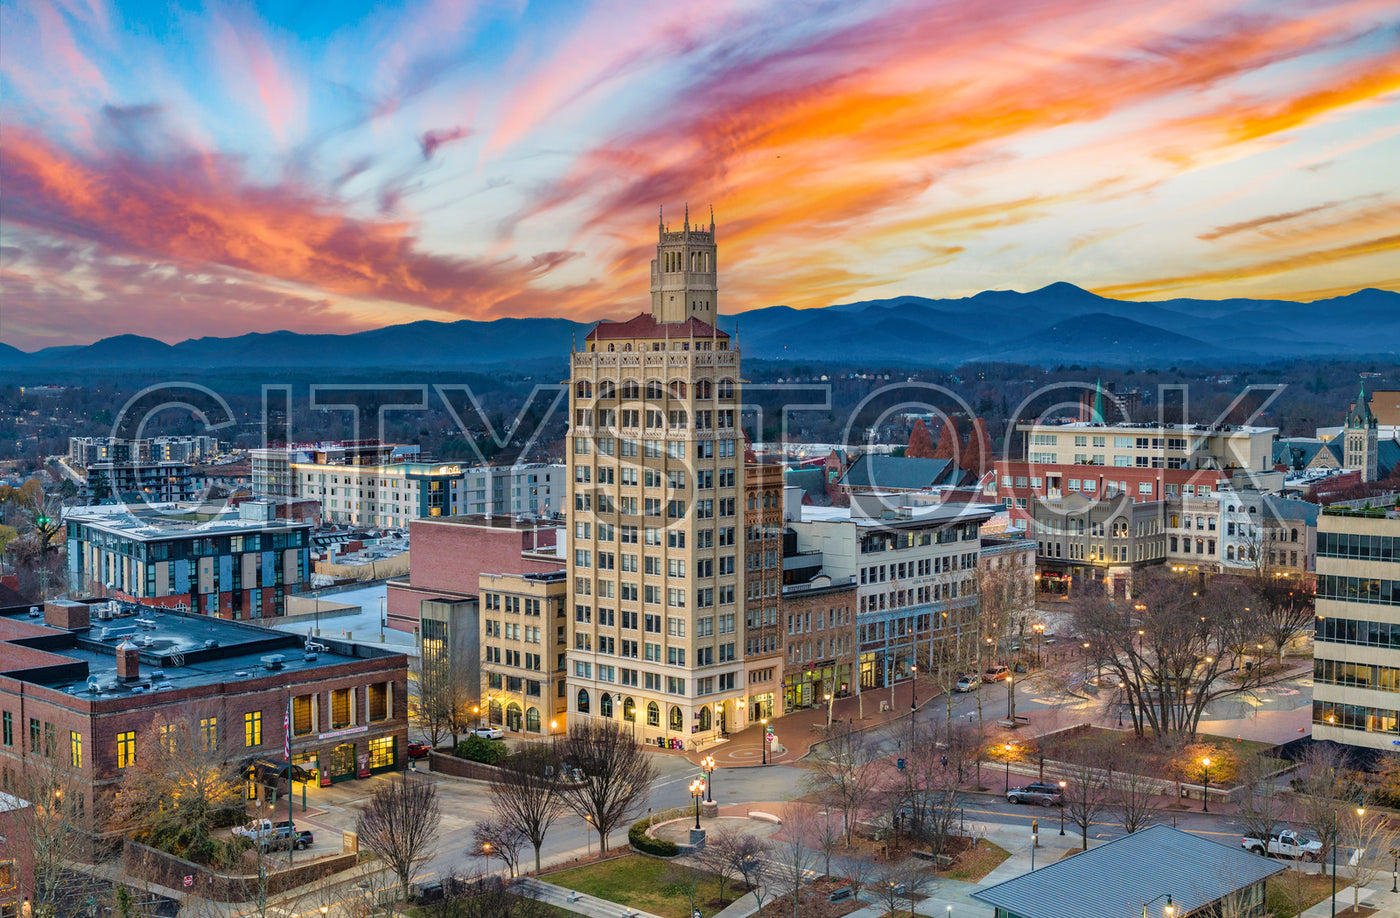 Aerial view of Asheville, NC at sunset with City Hall and mountains